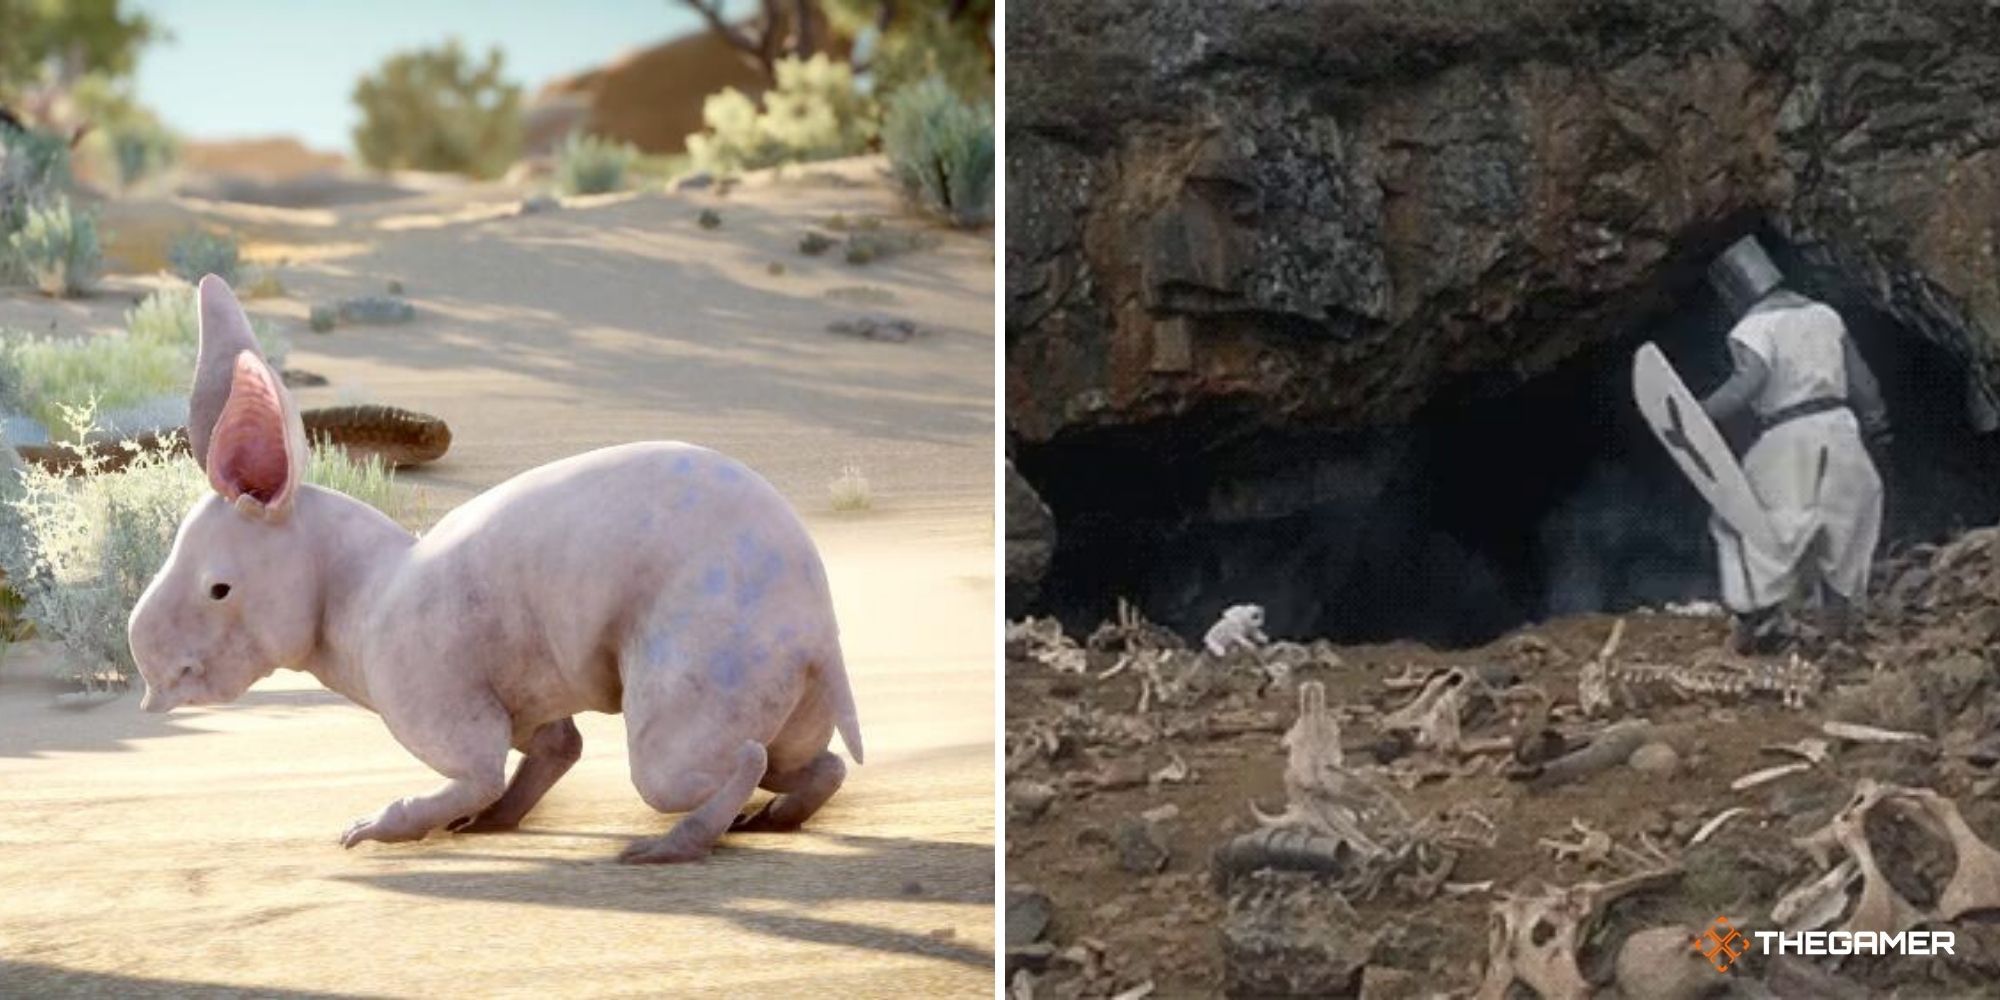 Monty Python Rabbit Cave (right), Nug from Dragon Age Inquisition (left)